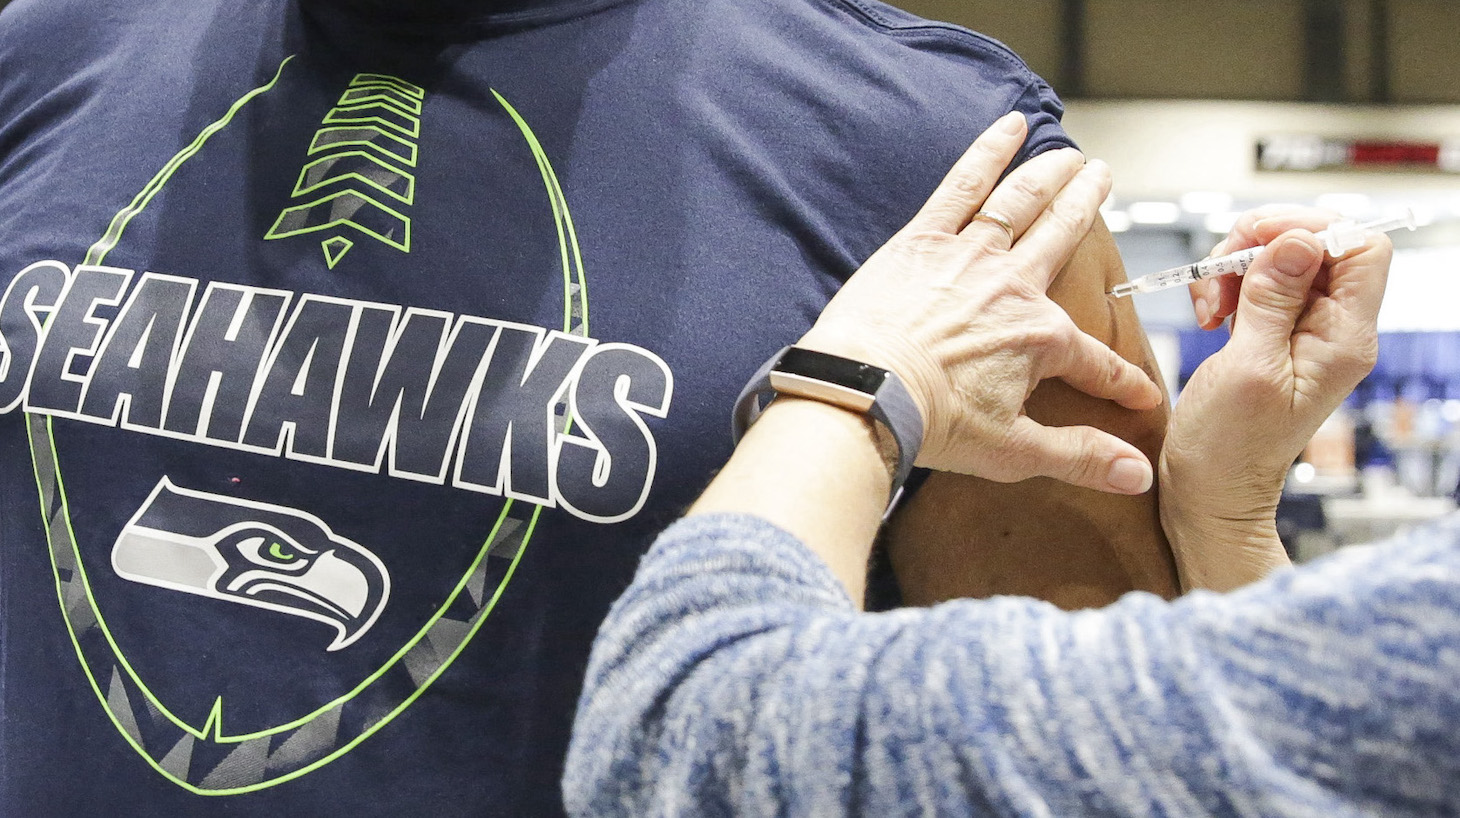 Cleveland Hughes wears Seahawks gear as he gets the Pfizer Covid-19 vaccine from Andrea Barnett during opening day of the Community Vaccination Site, a collaboration between the City of Seattle, First &amp; Goal Inc., and Swedish Health Services at the Lumen Field Event Center in Seattle, Washington on March 13, 2021. (Photo by Jason Redmond / AFP) (Photo by JASON REDMOND/AFP via Getty Images)